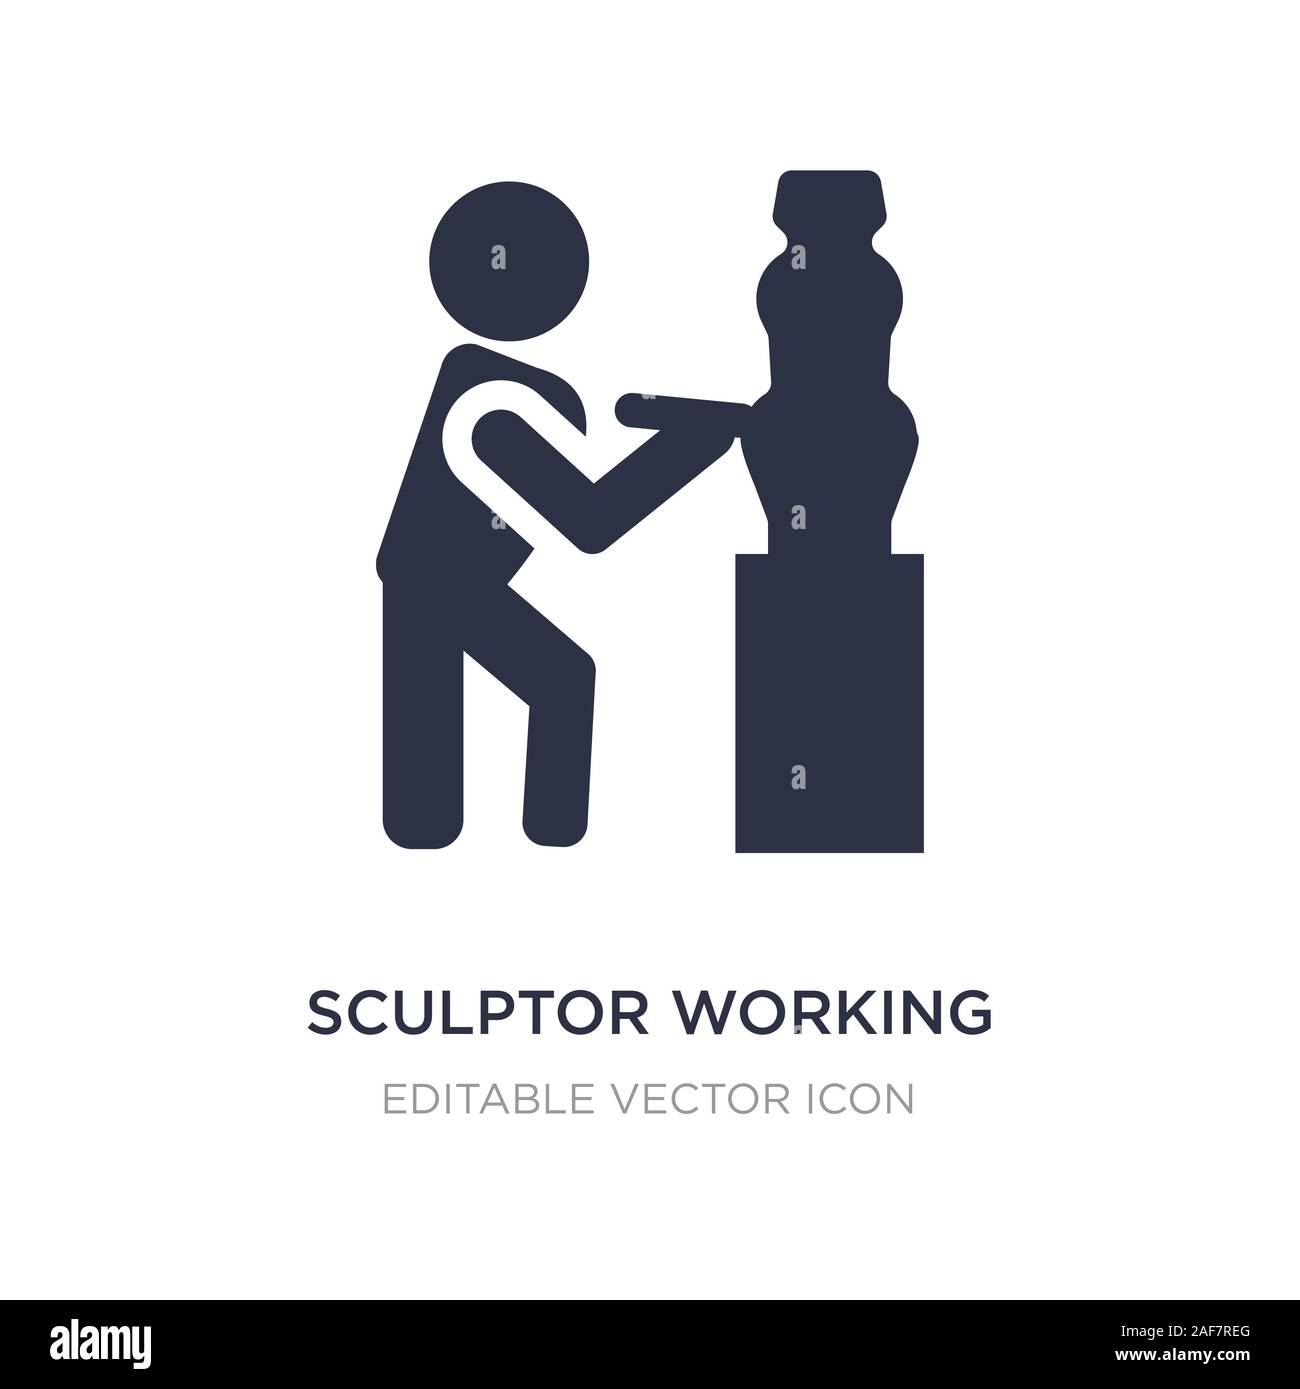 sculptor working icon on white background. Simple element illustration from People concept. sculptor working icon symbol design. Stock Vector